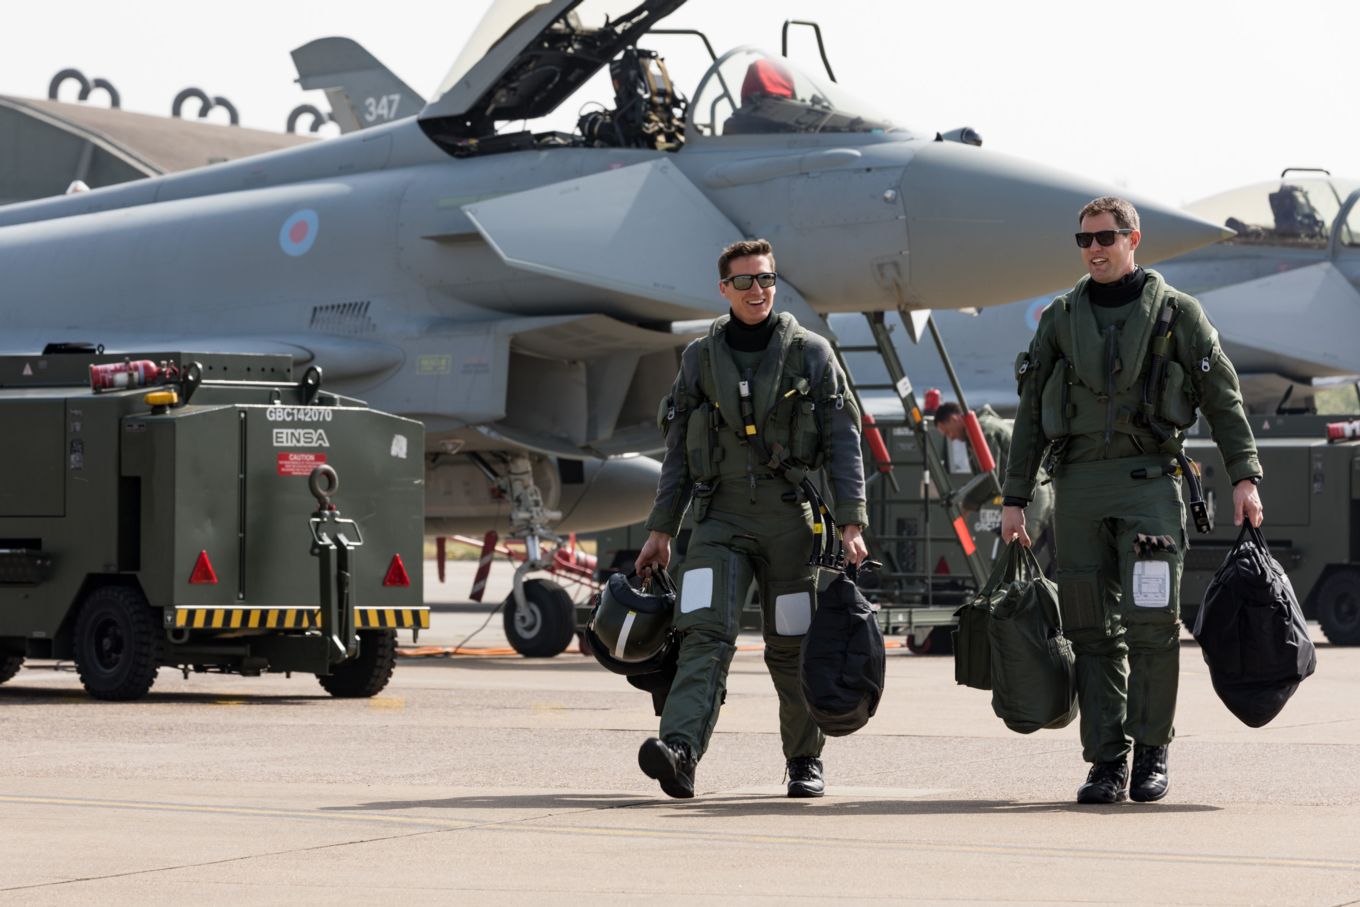 Typhoon pilots from XI Squadron walking to their aircraft.